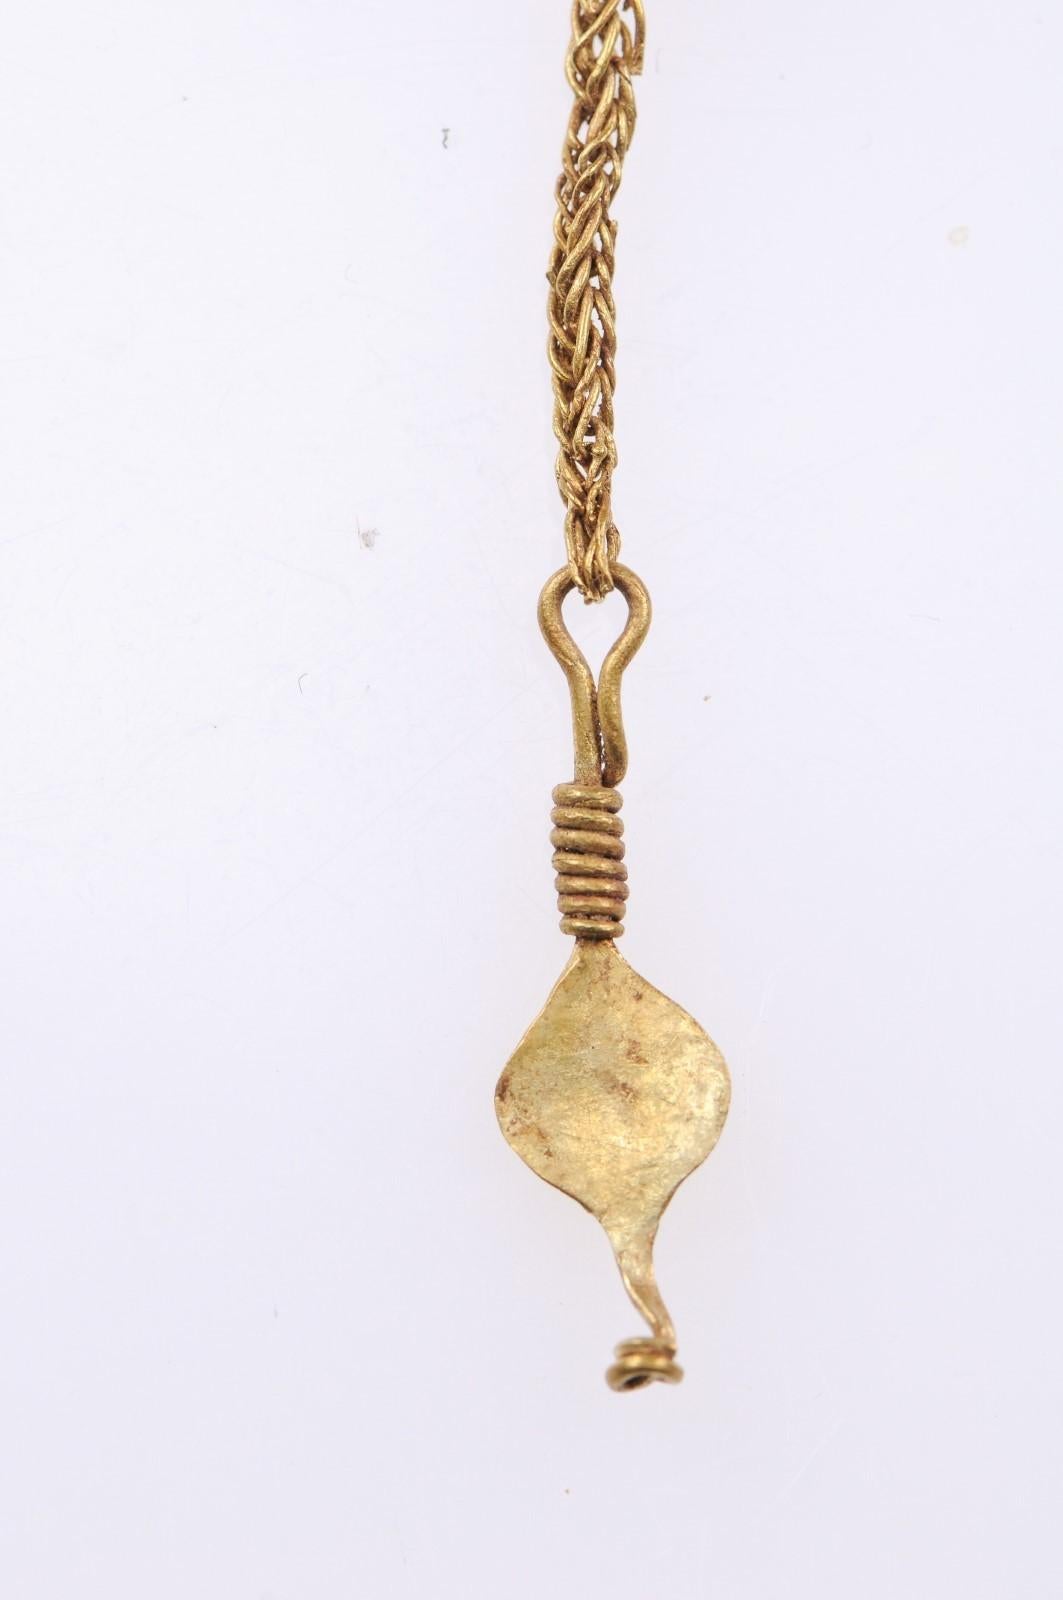 Ancient Scaraboid & Roman Jewelry Pendant For Sale 1